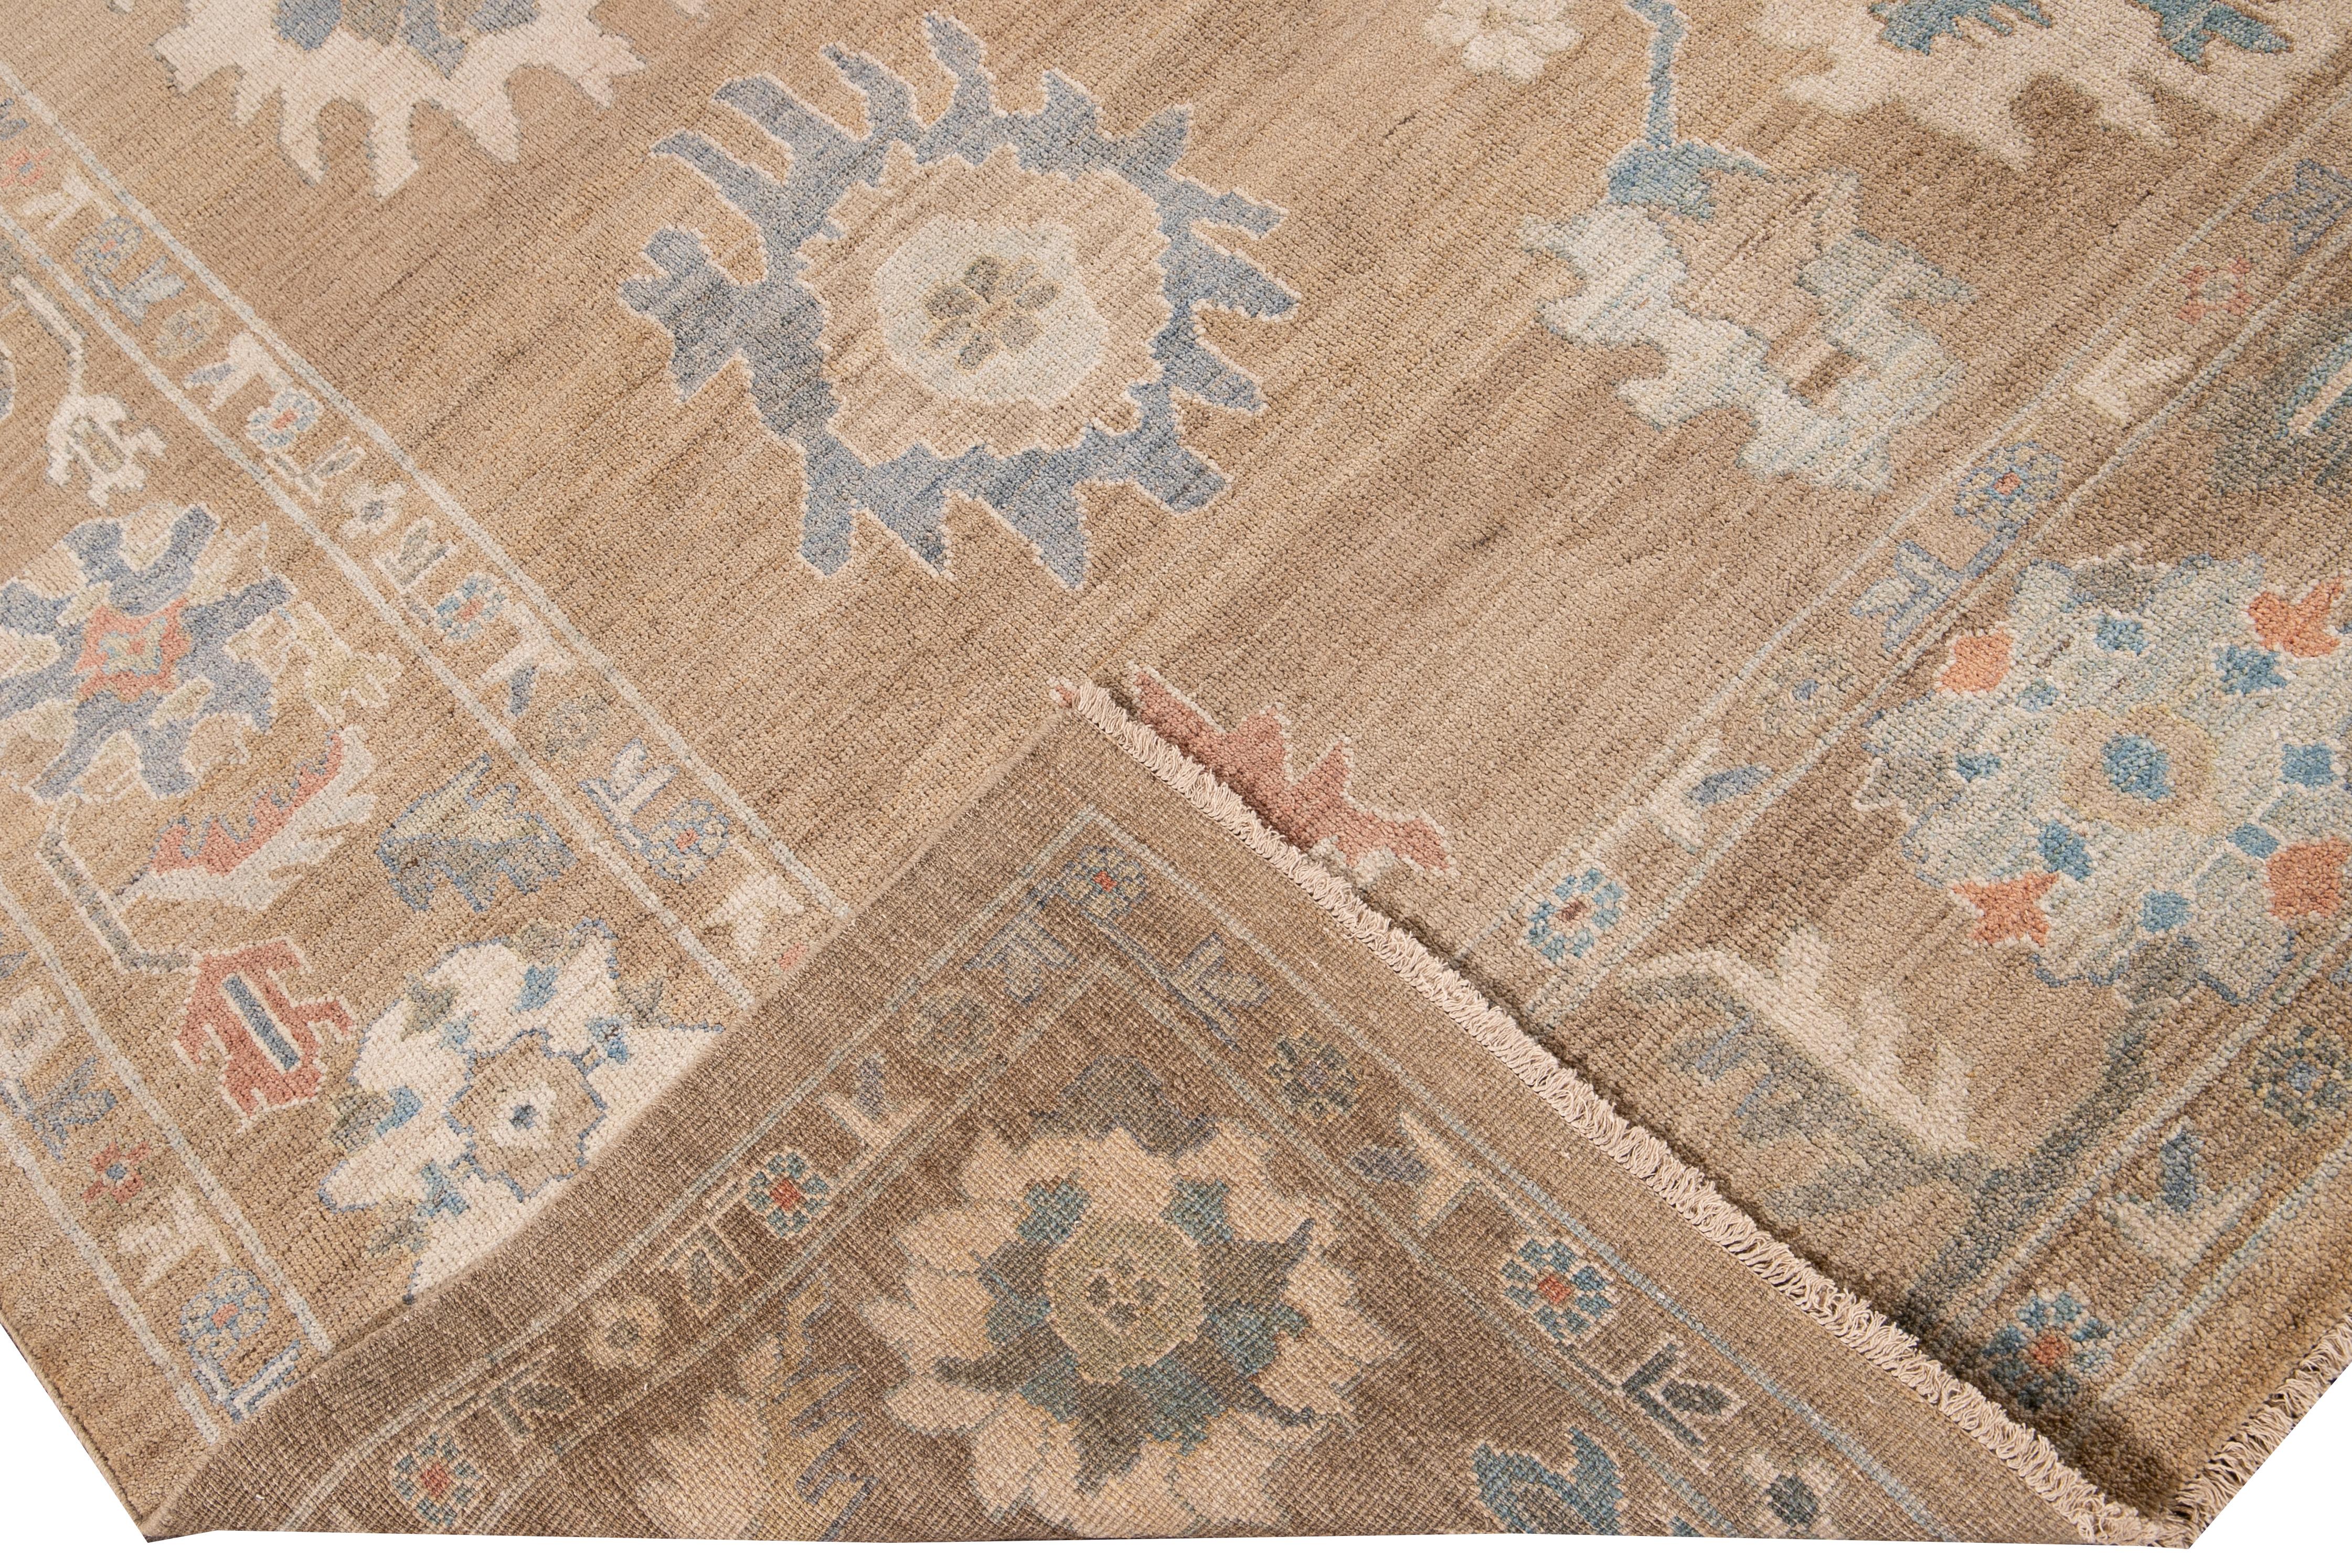 Beautiful modern Sultanabad hand-knotted wool rug with a brown field. This Sultanabad rug has a multi-color accent in a gorgeous all-over Classic floral design.

This rug measures: 9'10